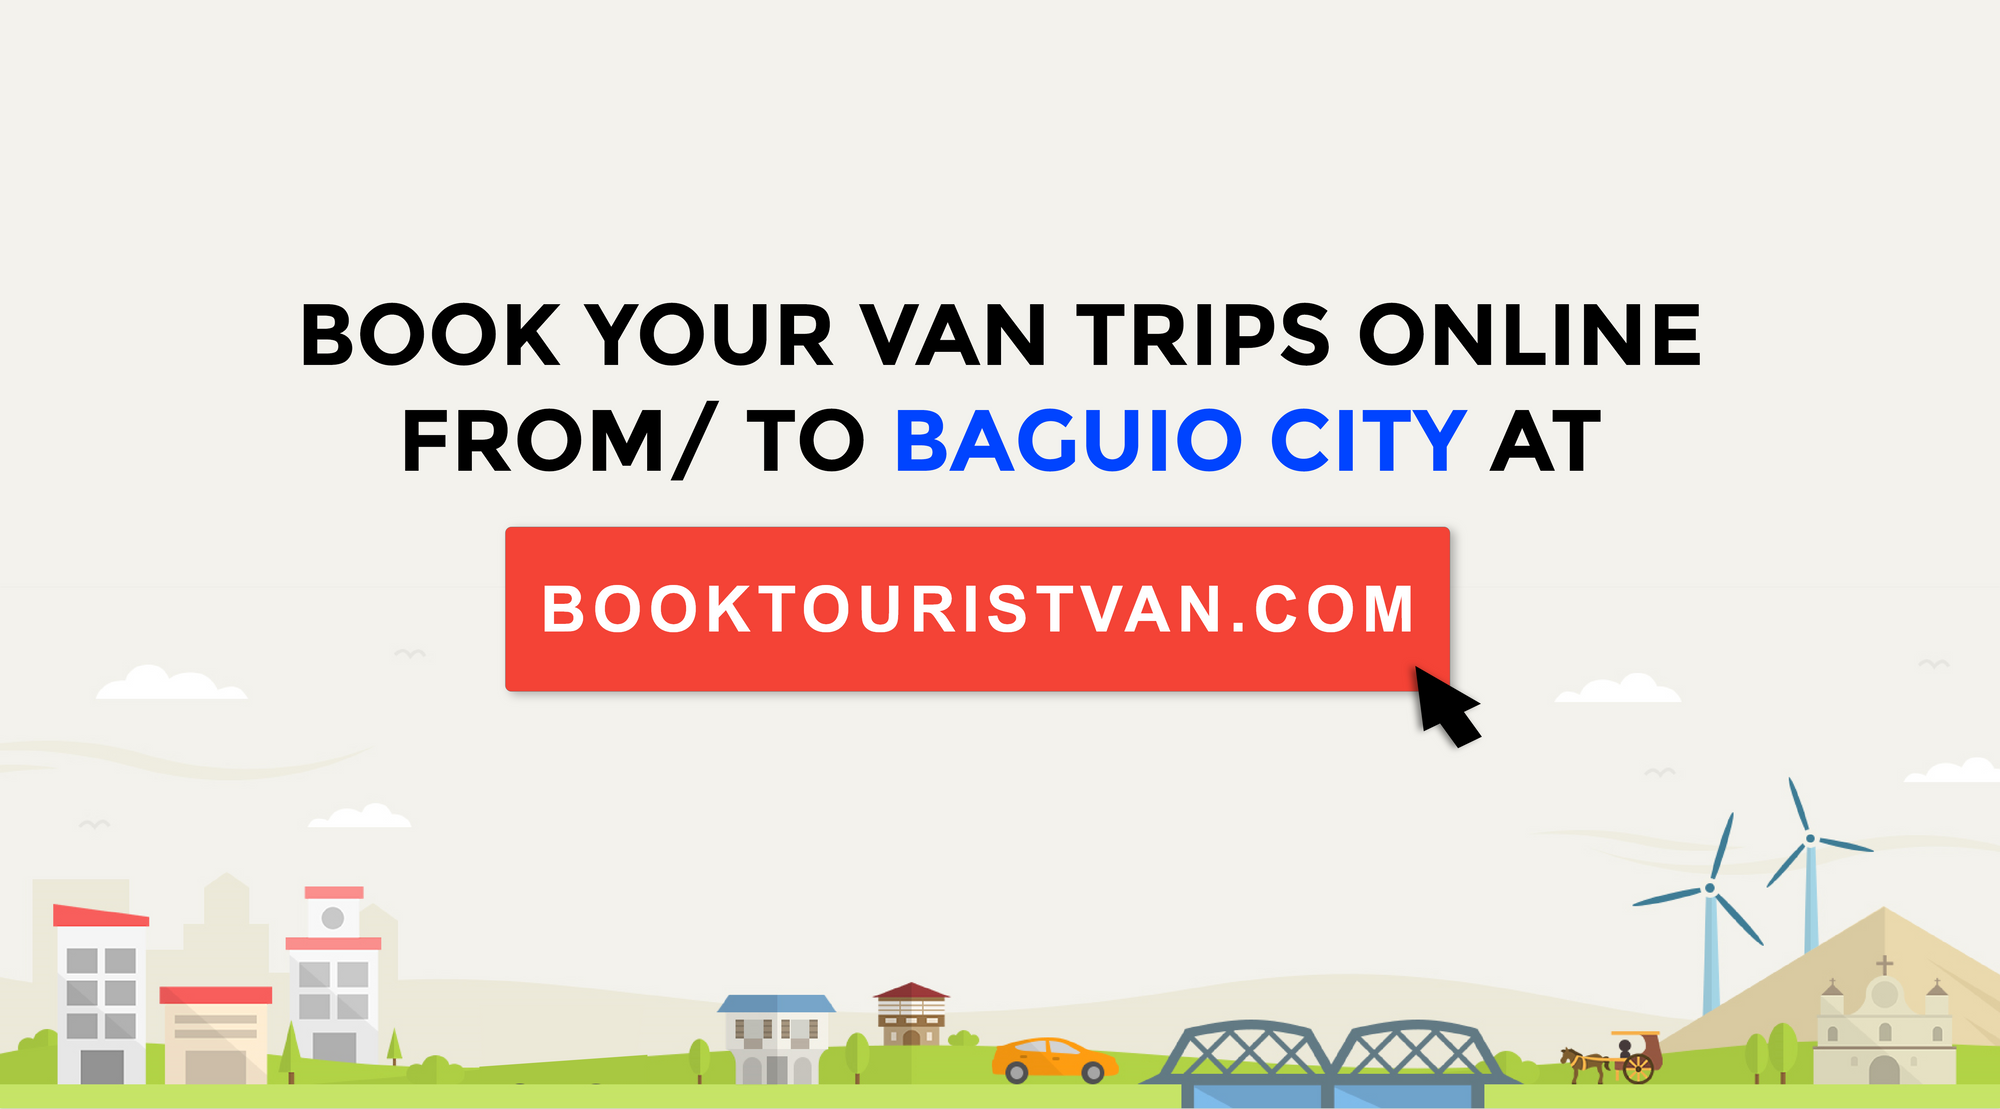 Book your van trips from Baguio City to Manila!